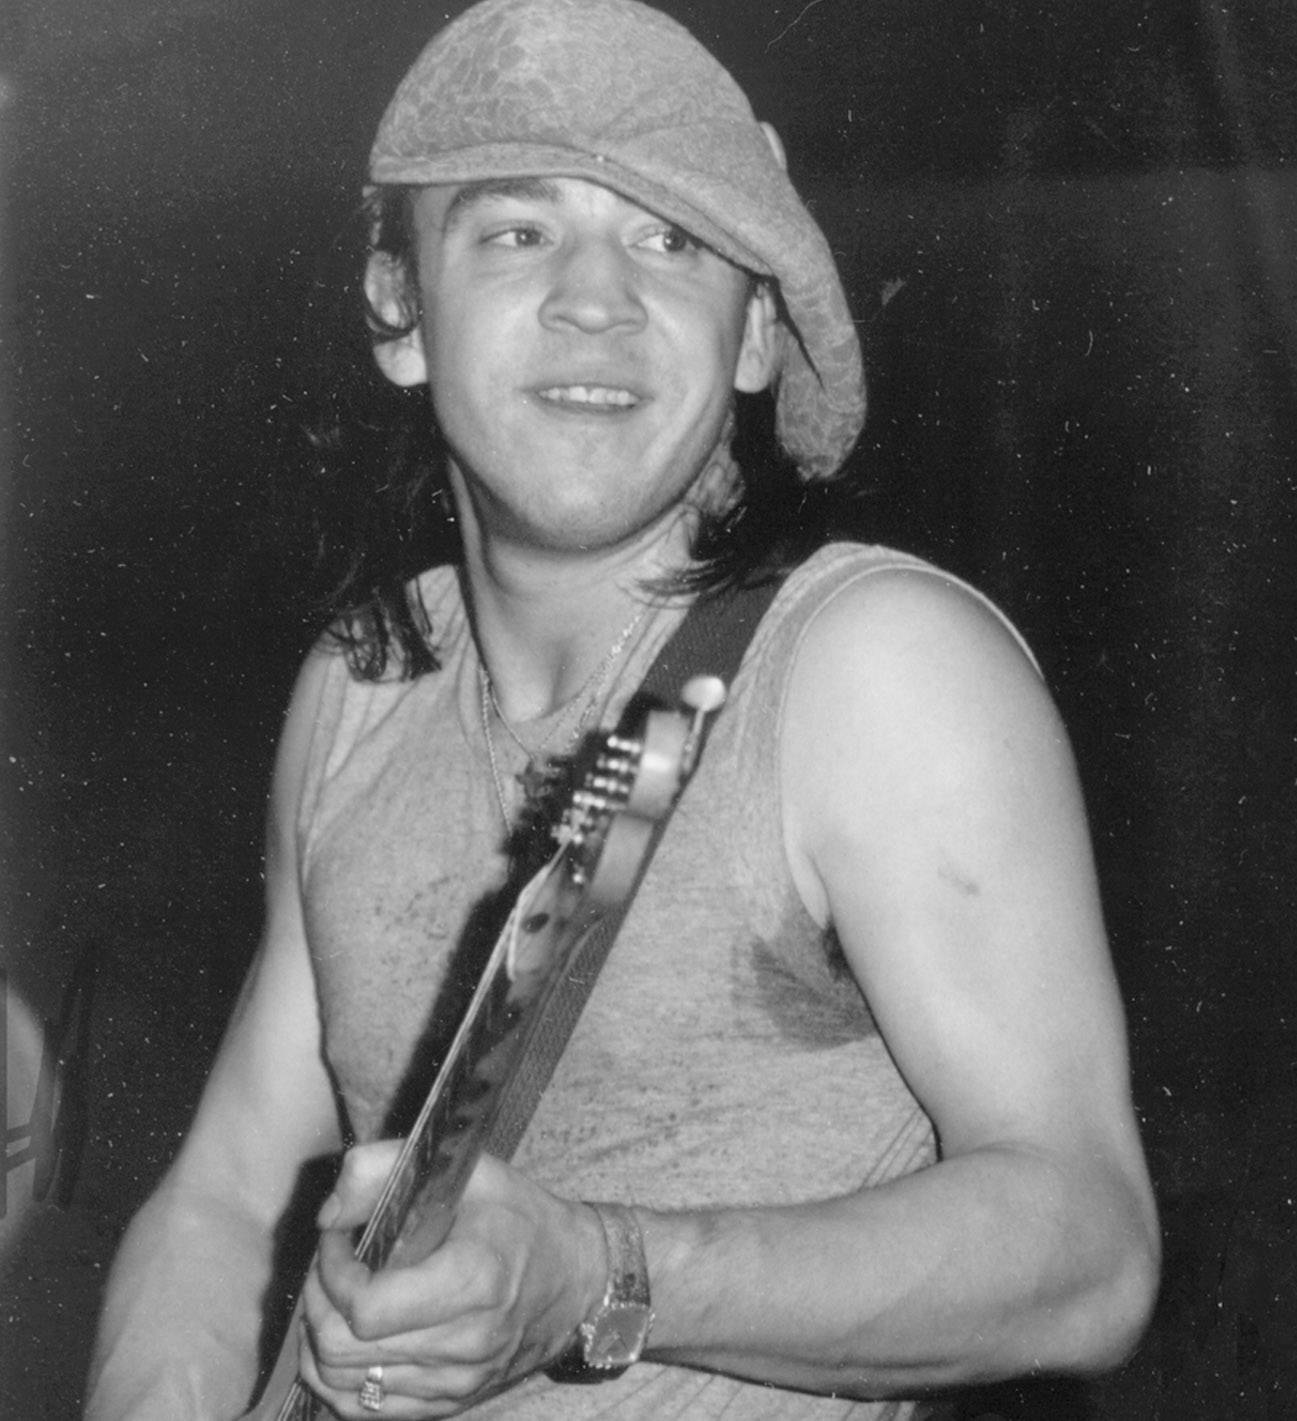 black and white photo of stevie ray vaughn playing guitar